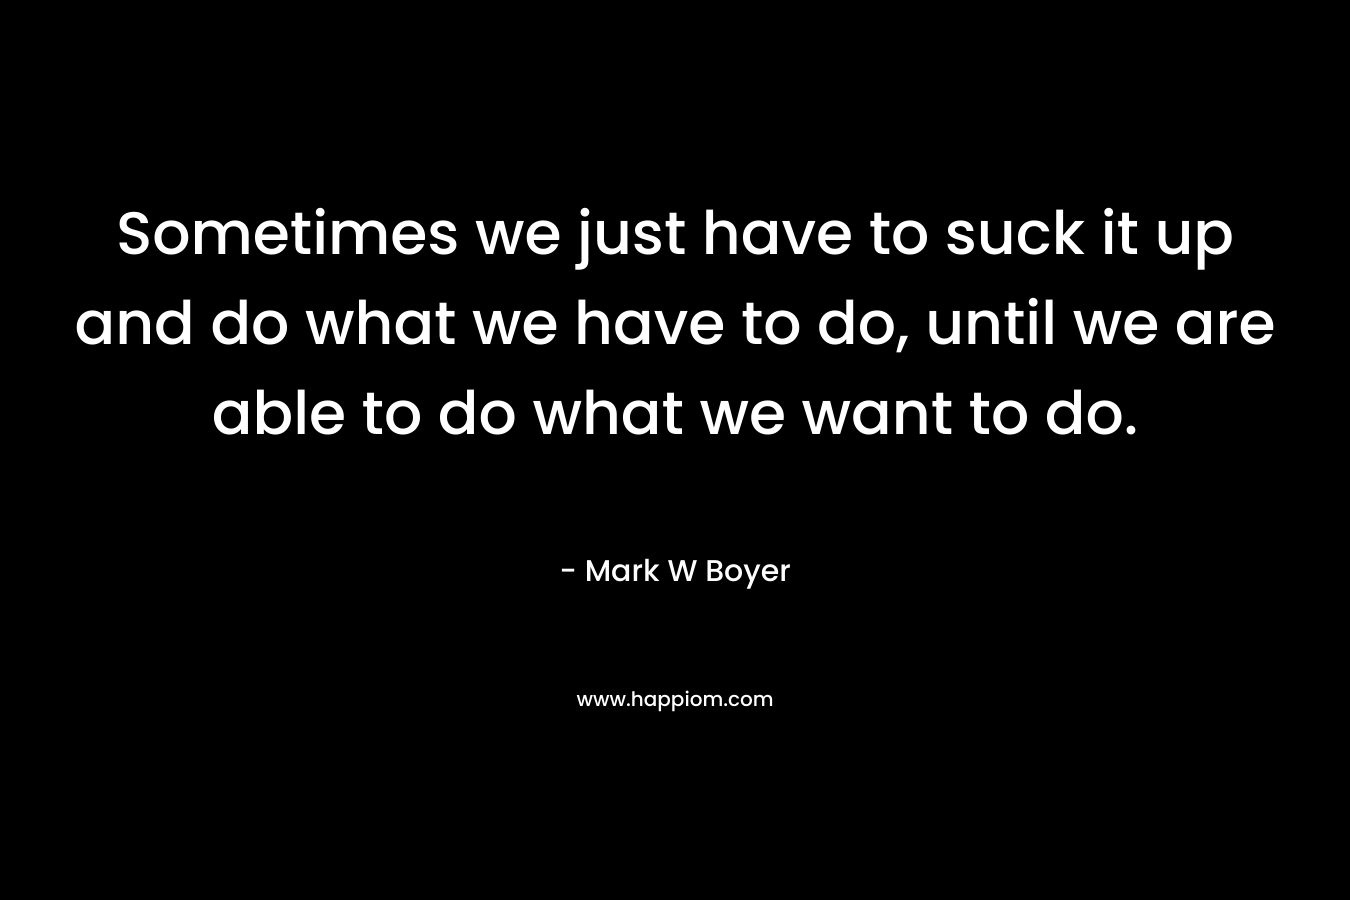 Sometimes we just have to suck it up and do what we have to do, until we are able to do what we want to do. – Mark W Boyer